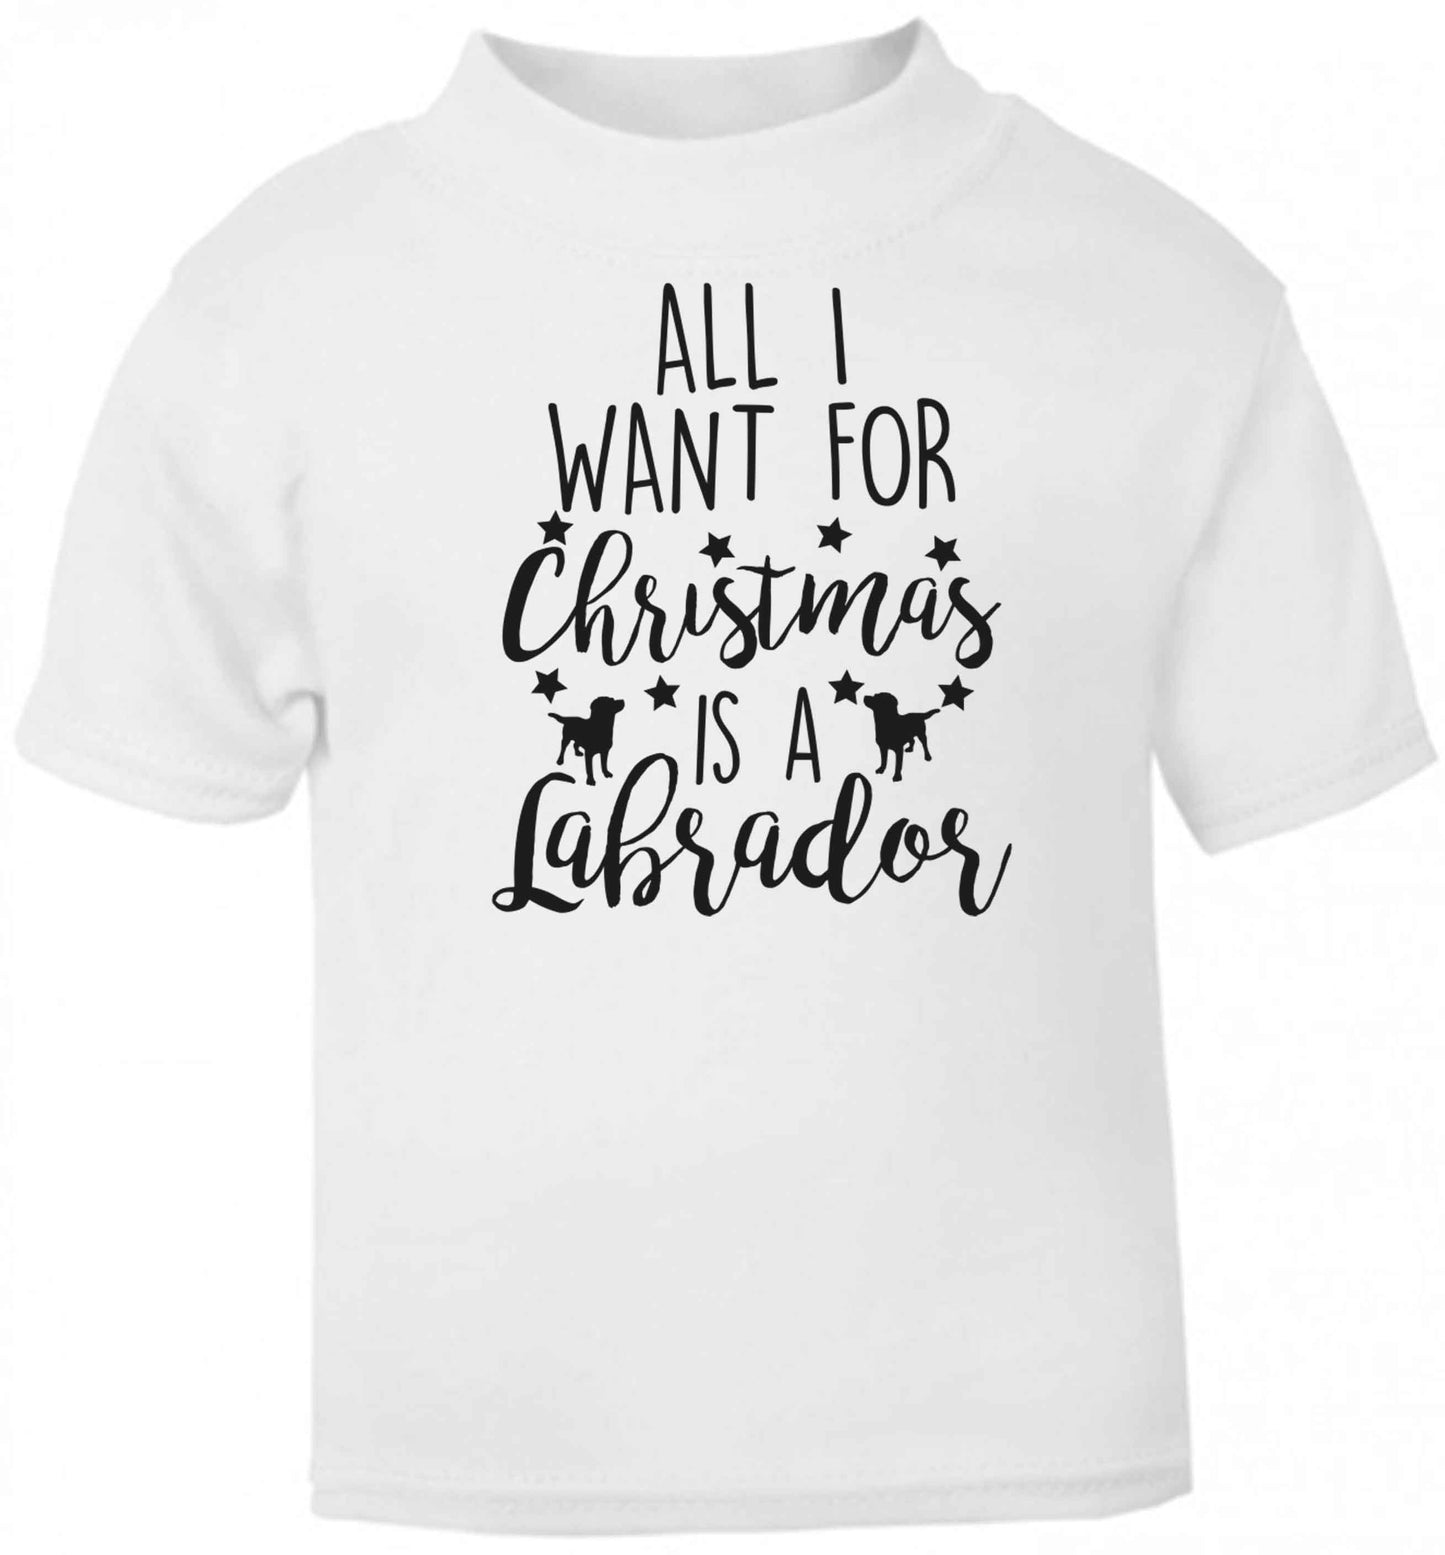 All I want for Christmas is a labrador baby toddler Tshirt 2 Years